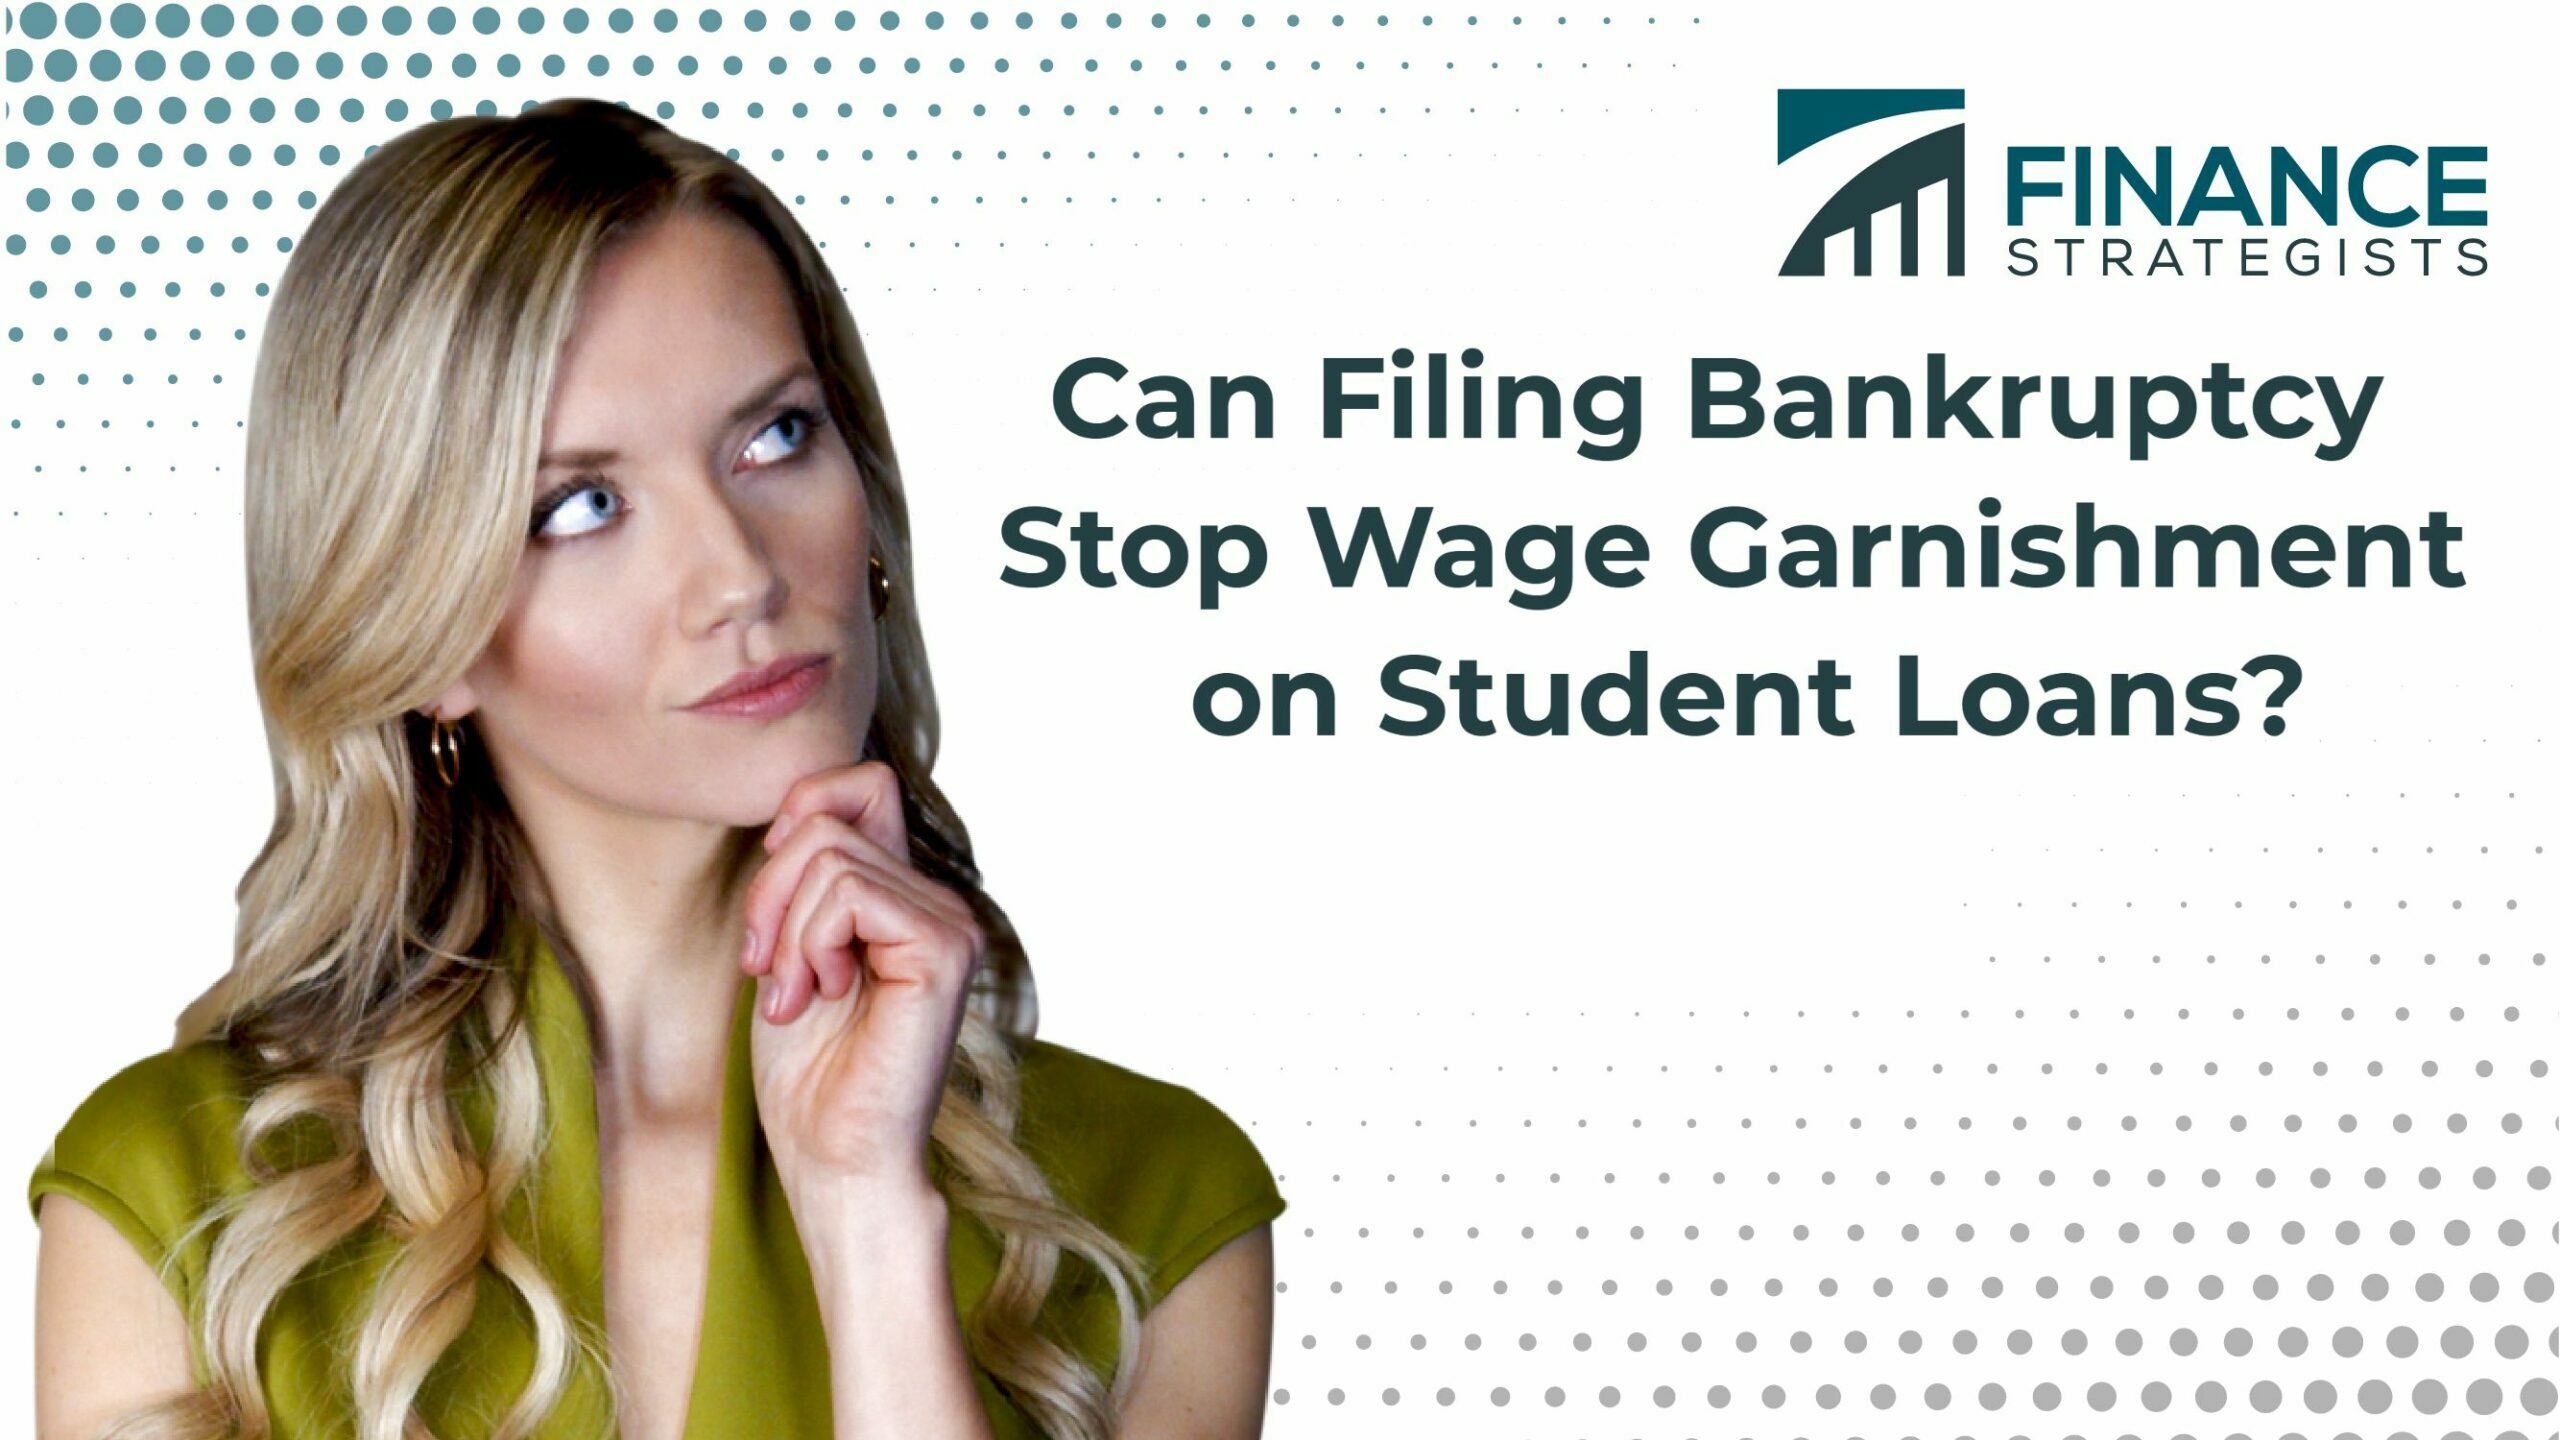 Can Filing Bankruptcy Stop Wage Garnishment on Student Loans?